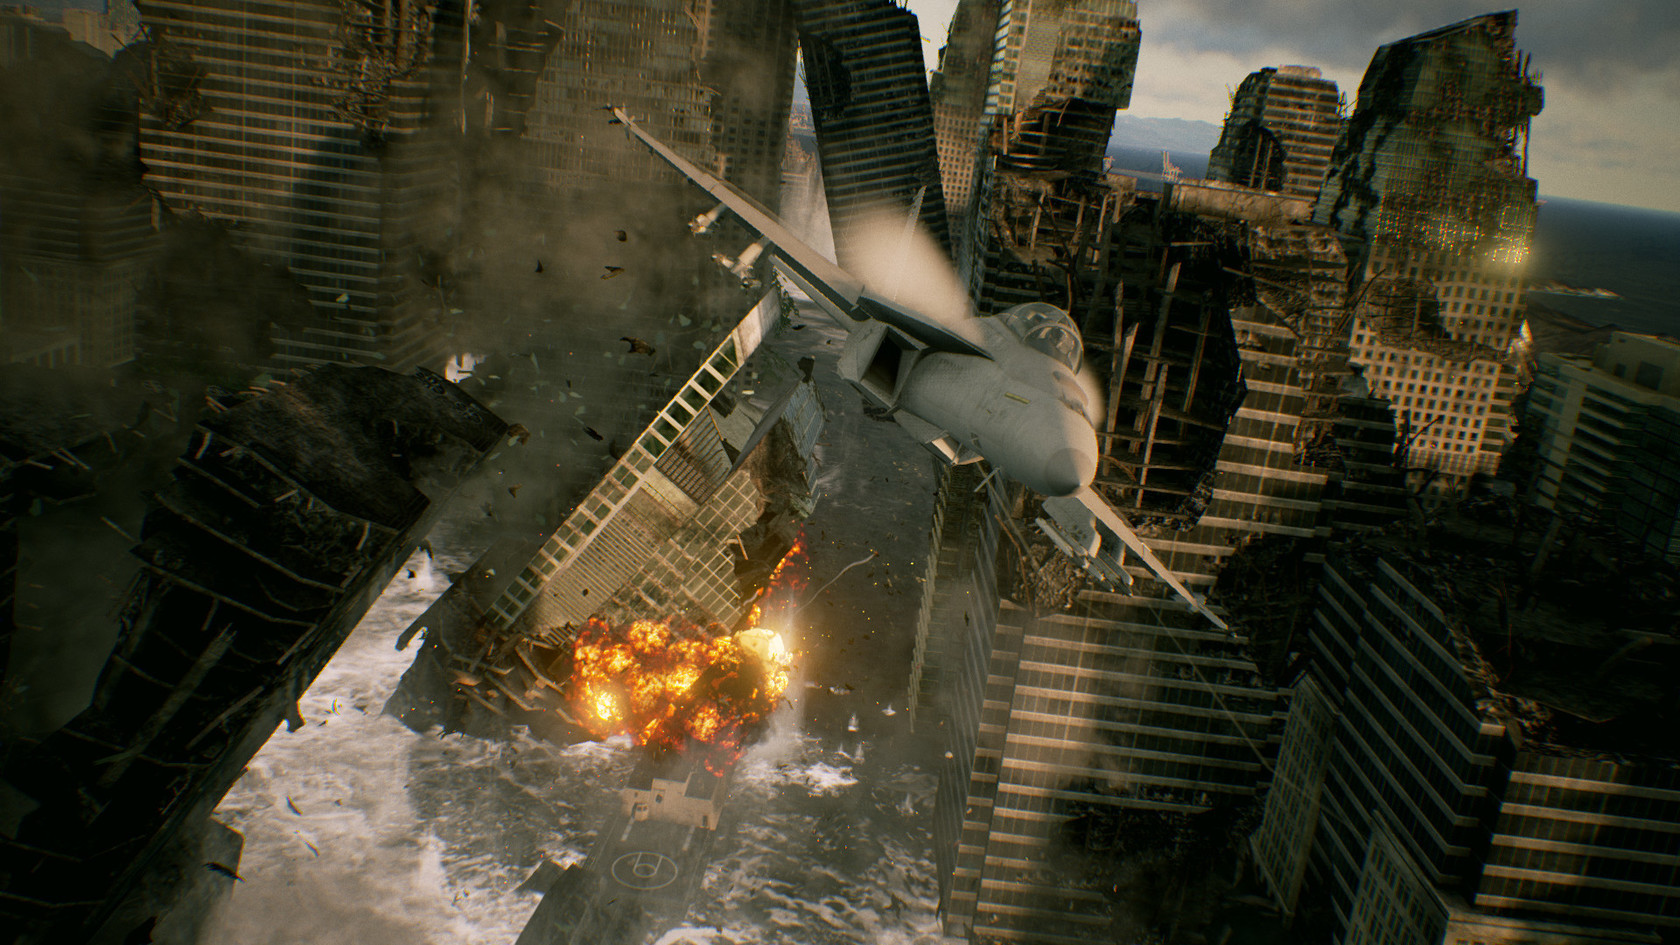 Outlaw achievement in Ace Combat 7: Skies Unknown